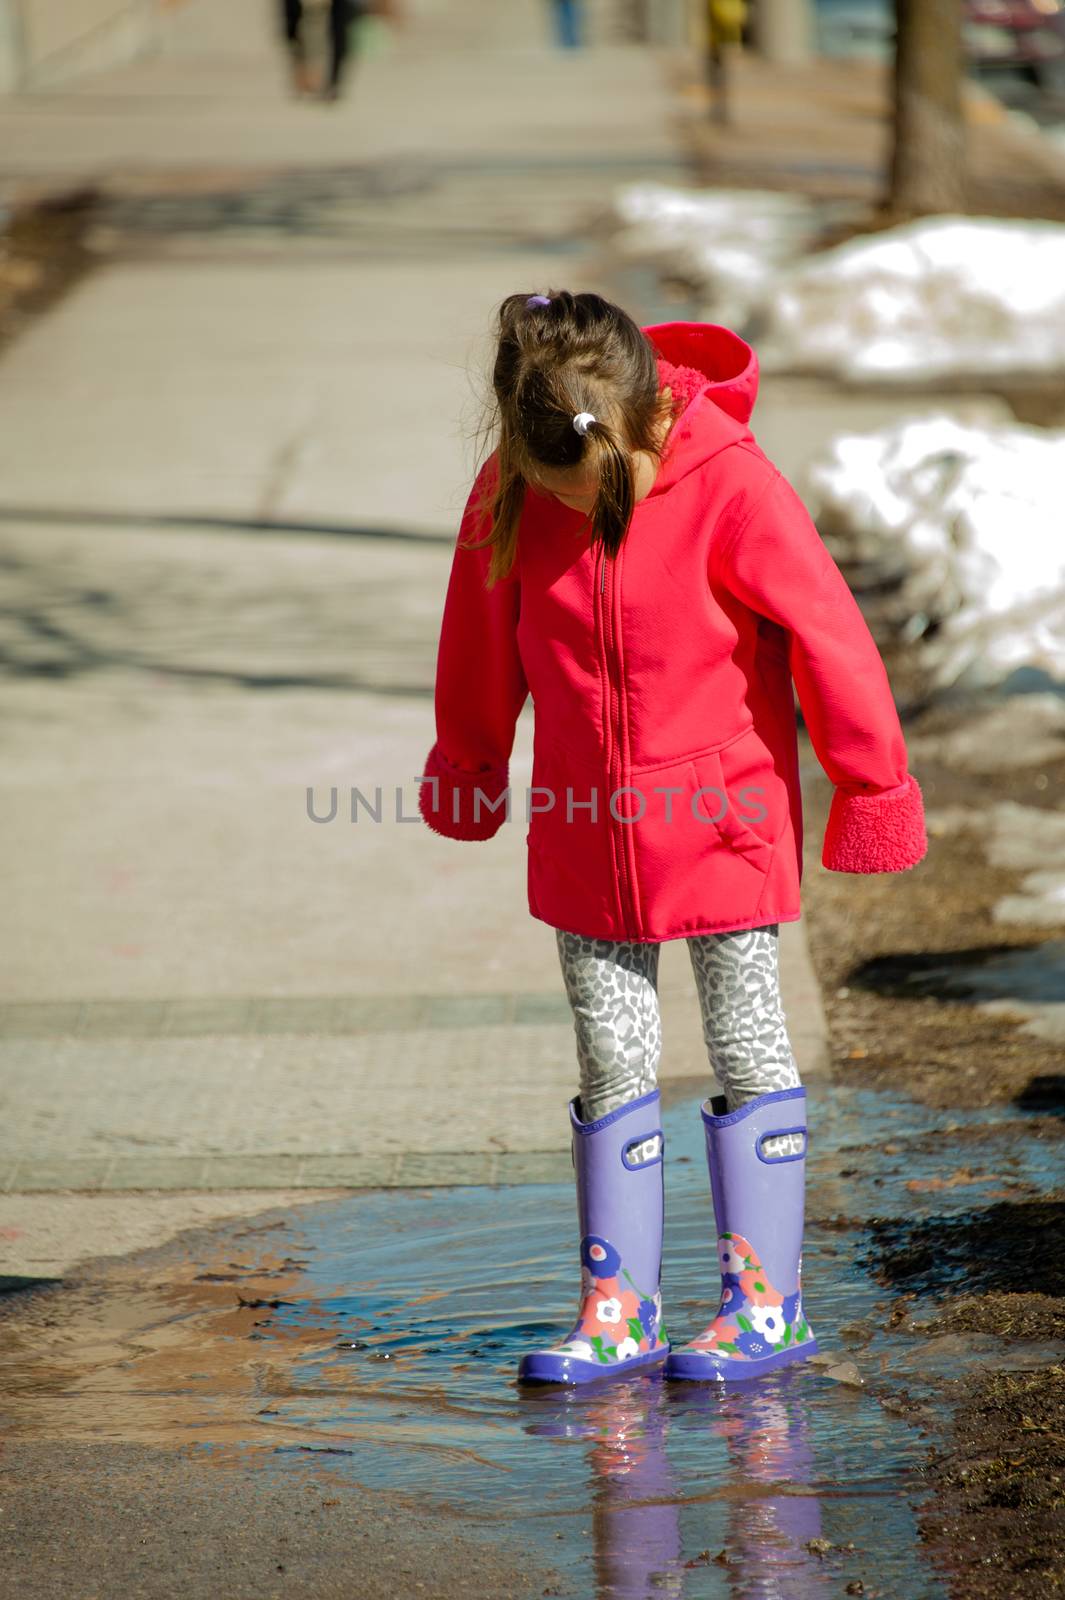 A girl in a red jacket and rubber boots is standing in a spring puddle of melted snow